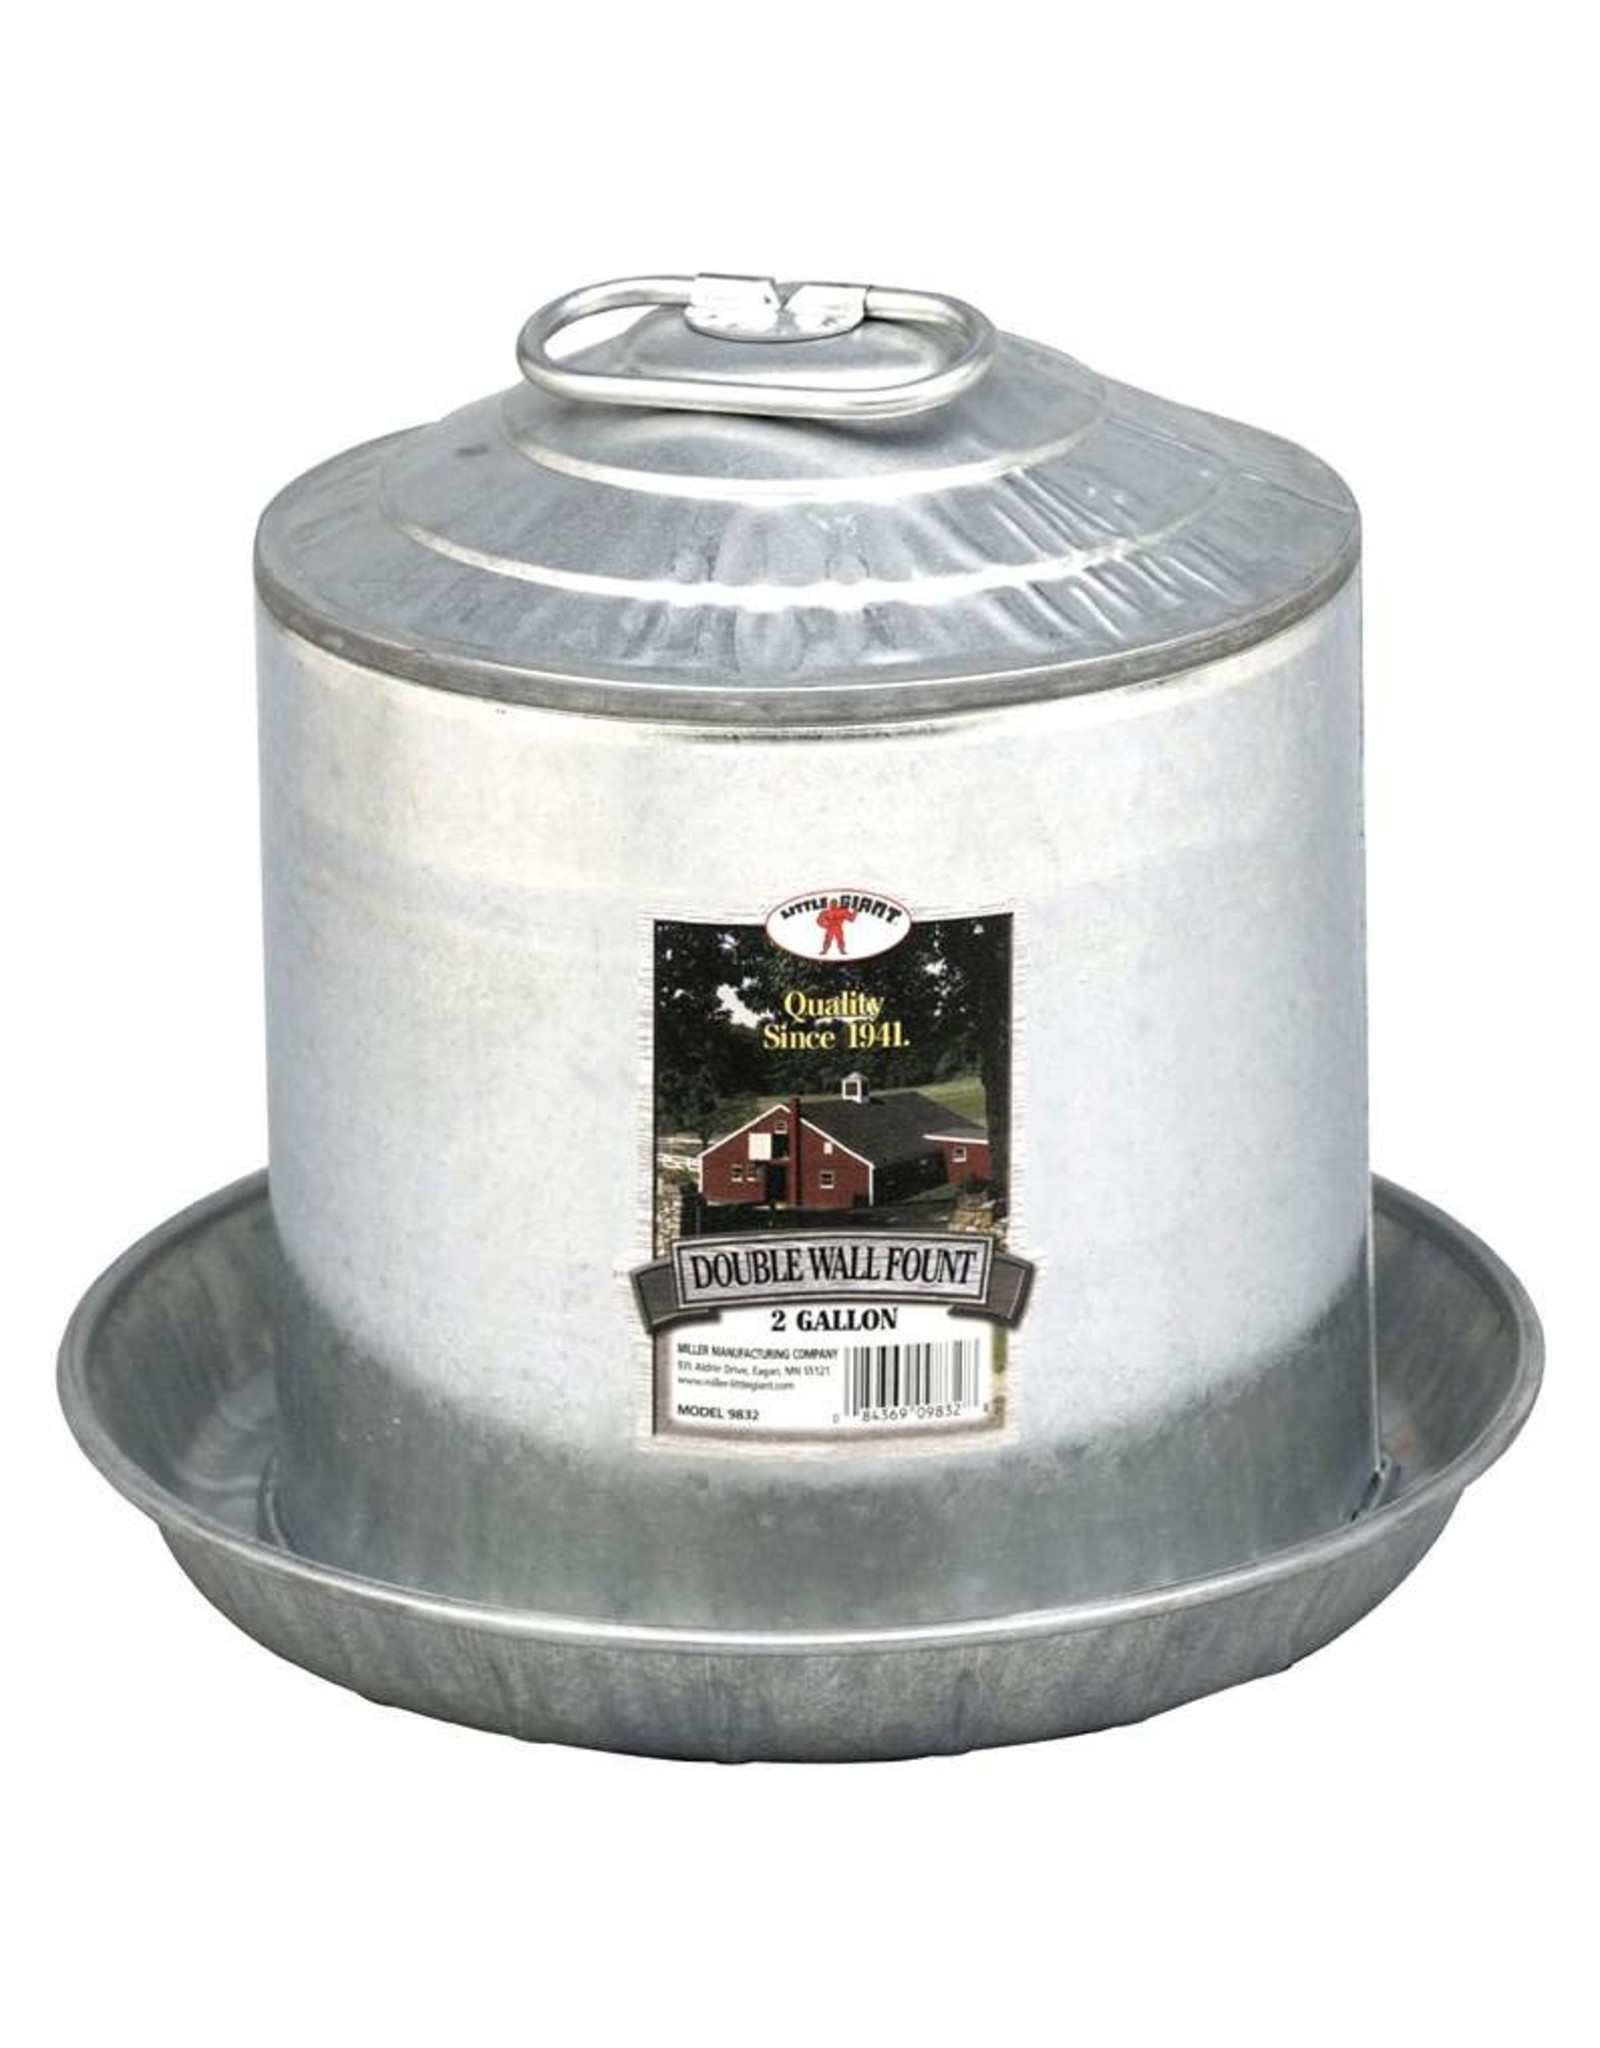 Little Giant Galvanized Double Wall Poultry Fount